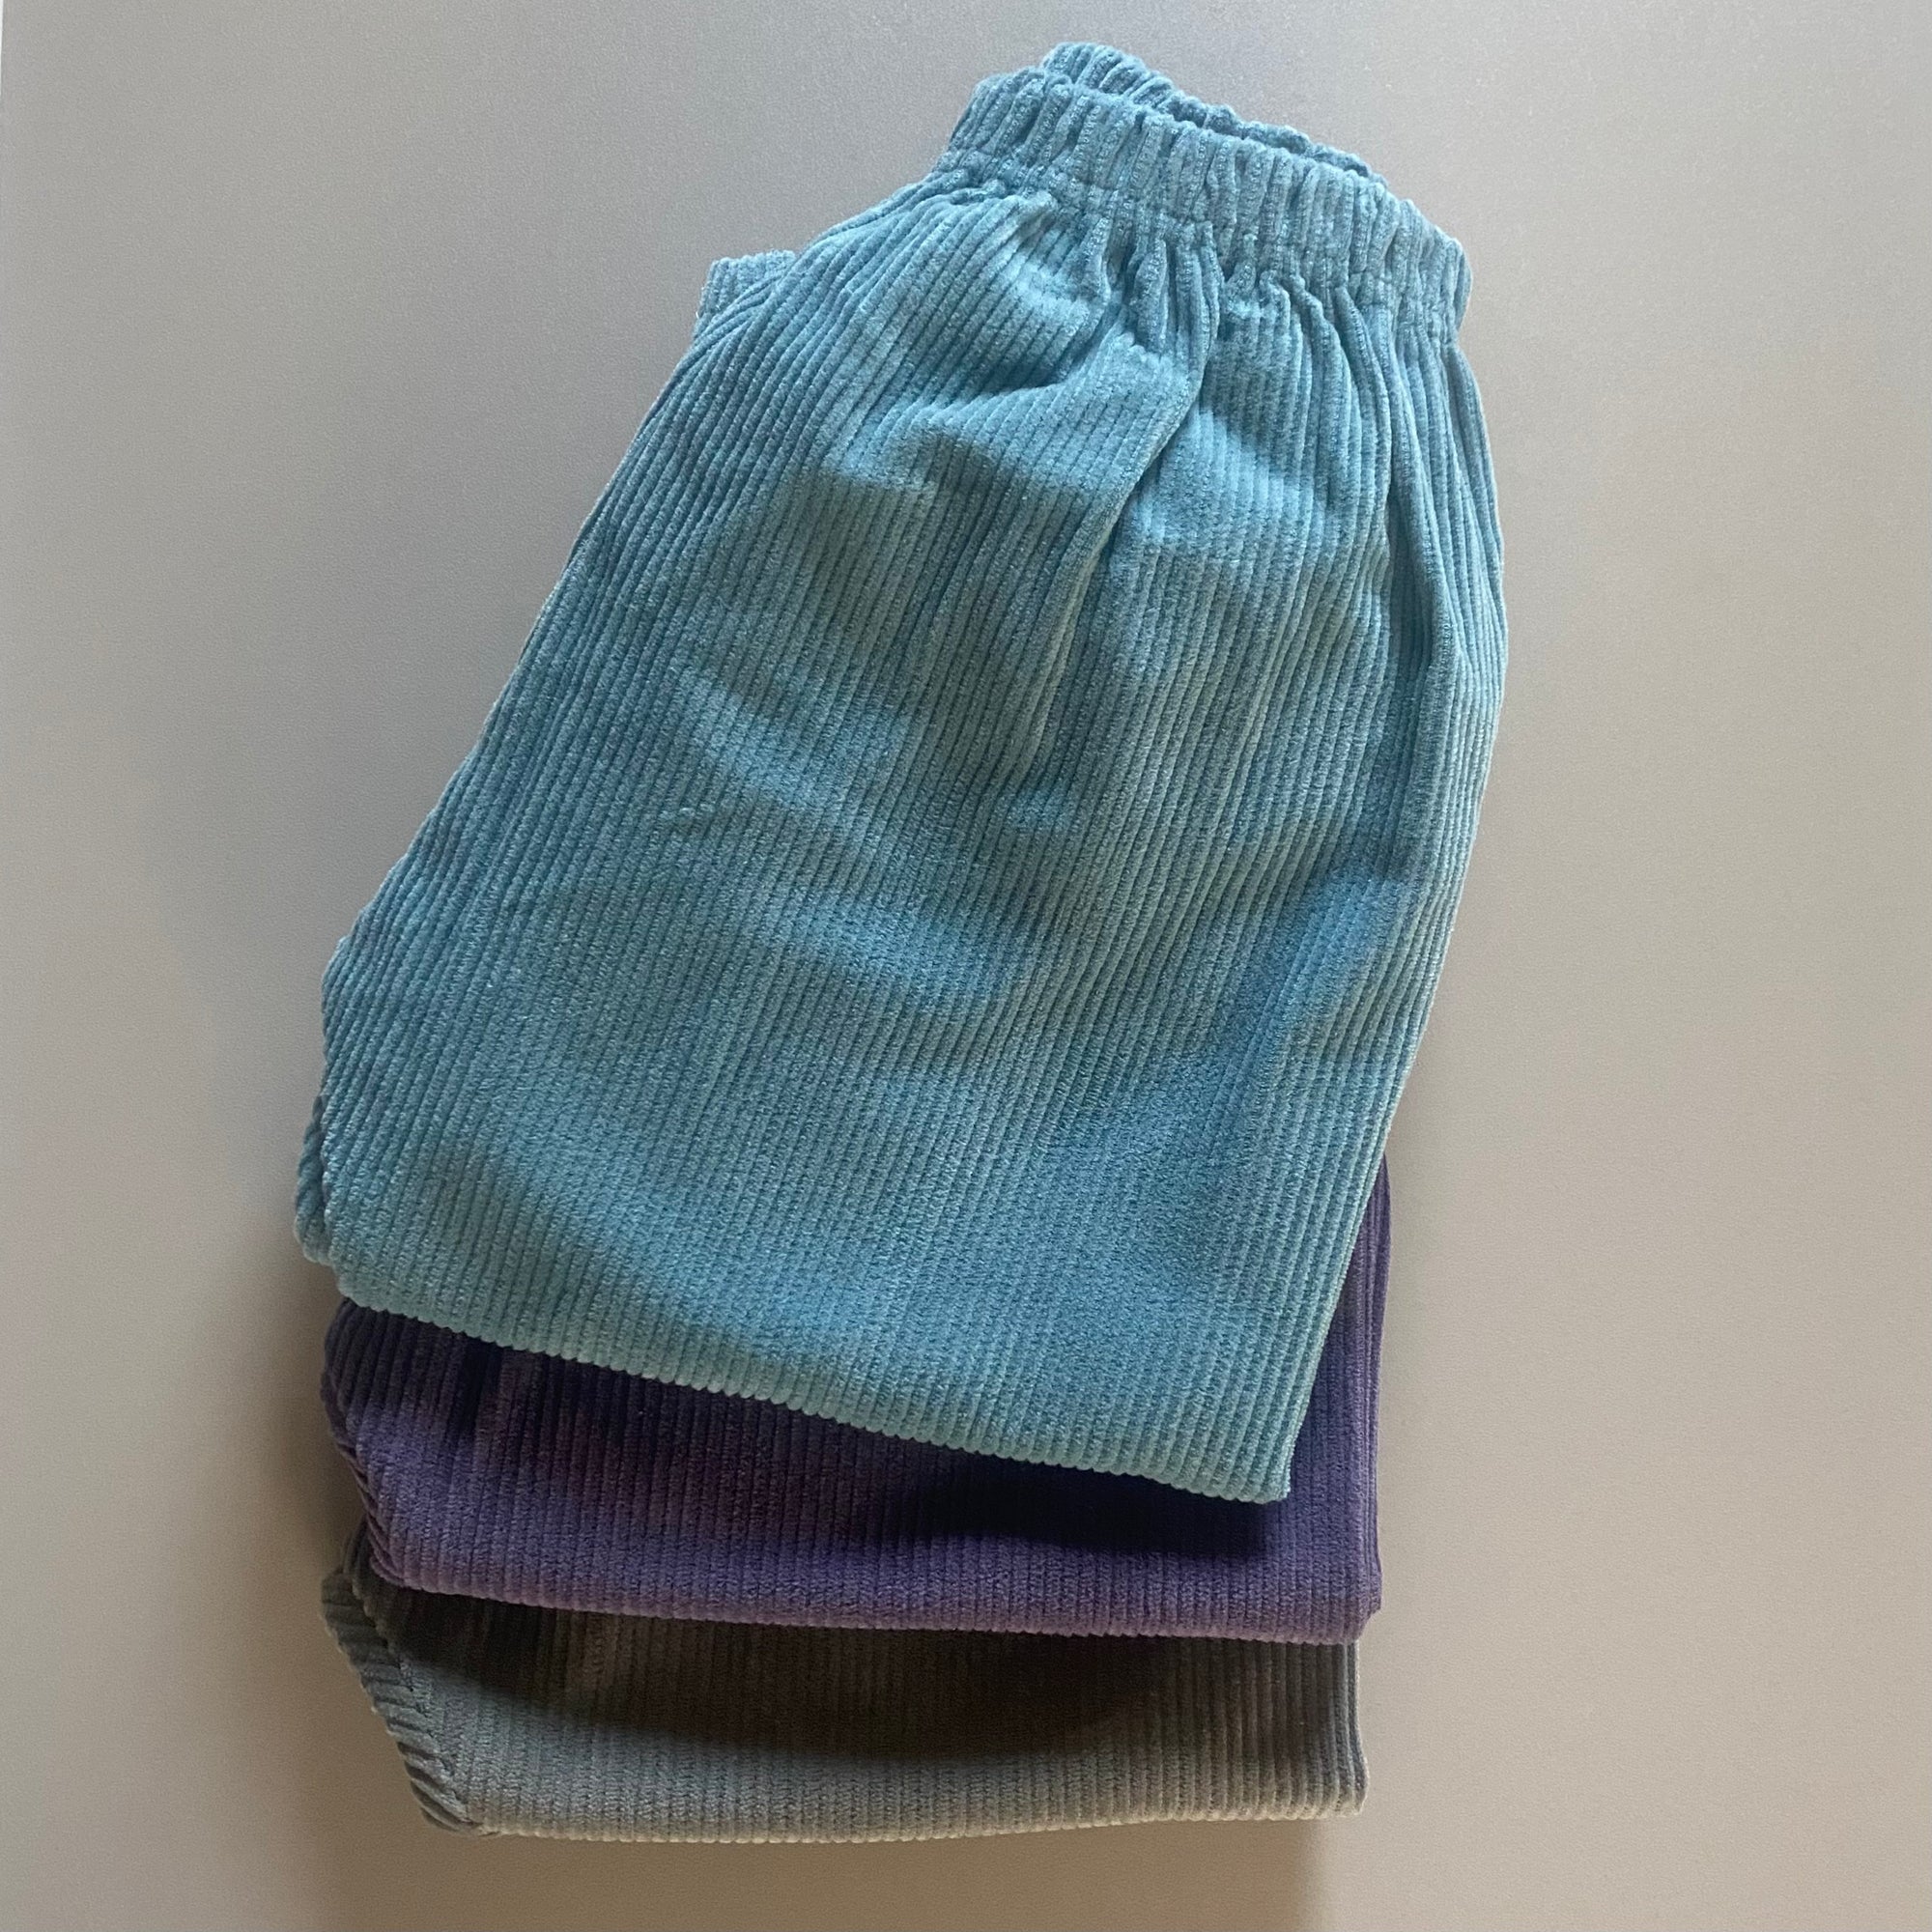 Corduroy Panpan Pants find Stylish Fashion for Little People- at Little Foxx Concept Store